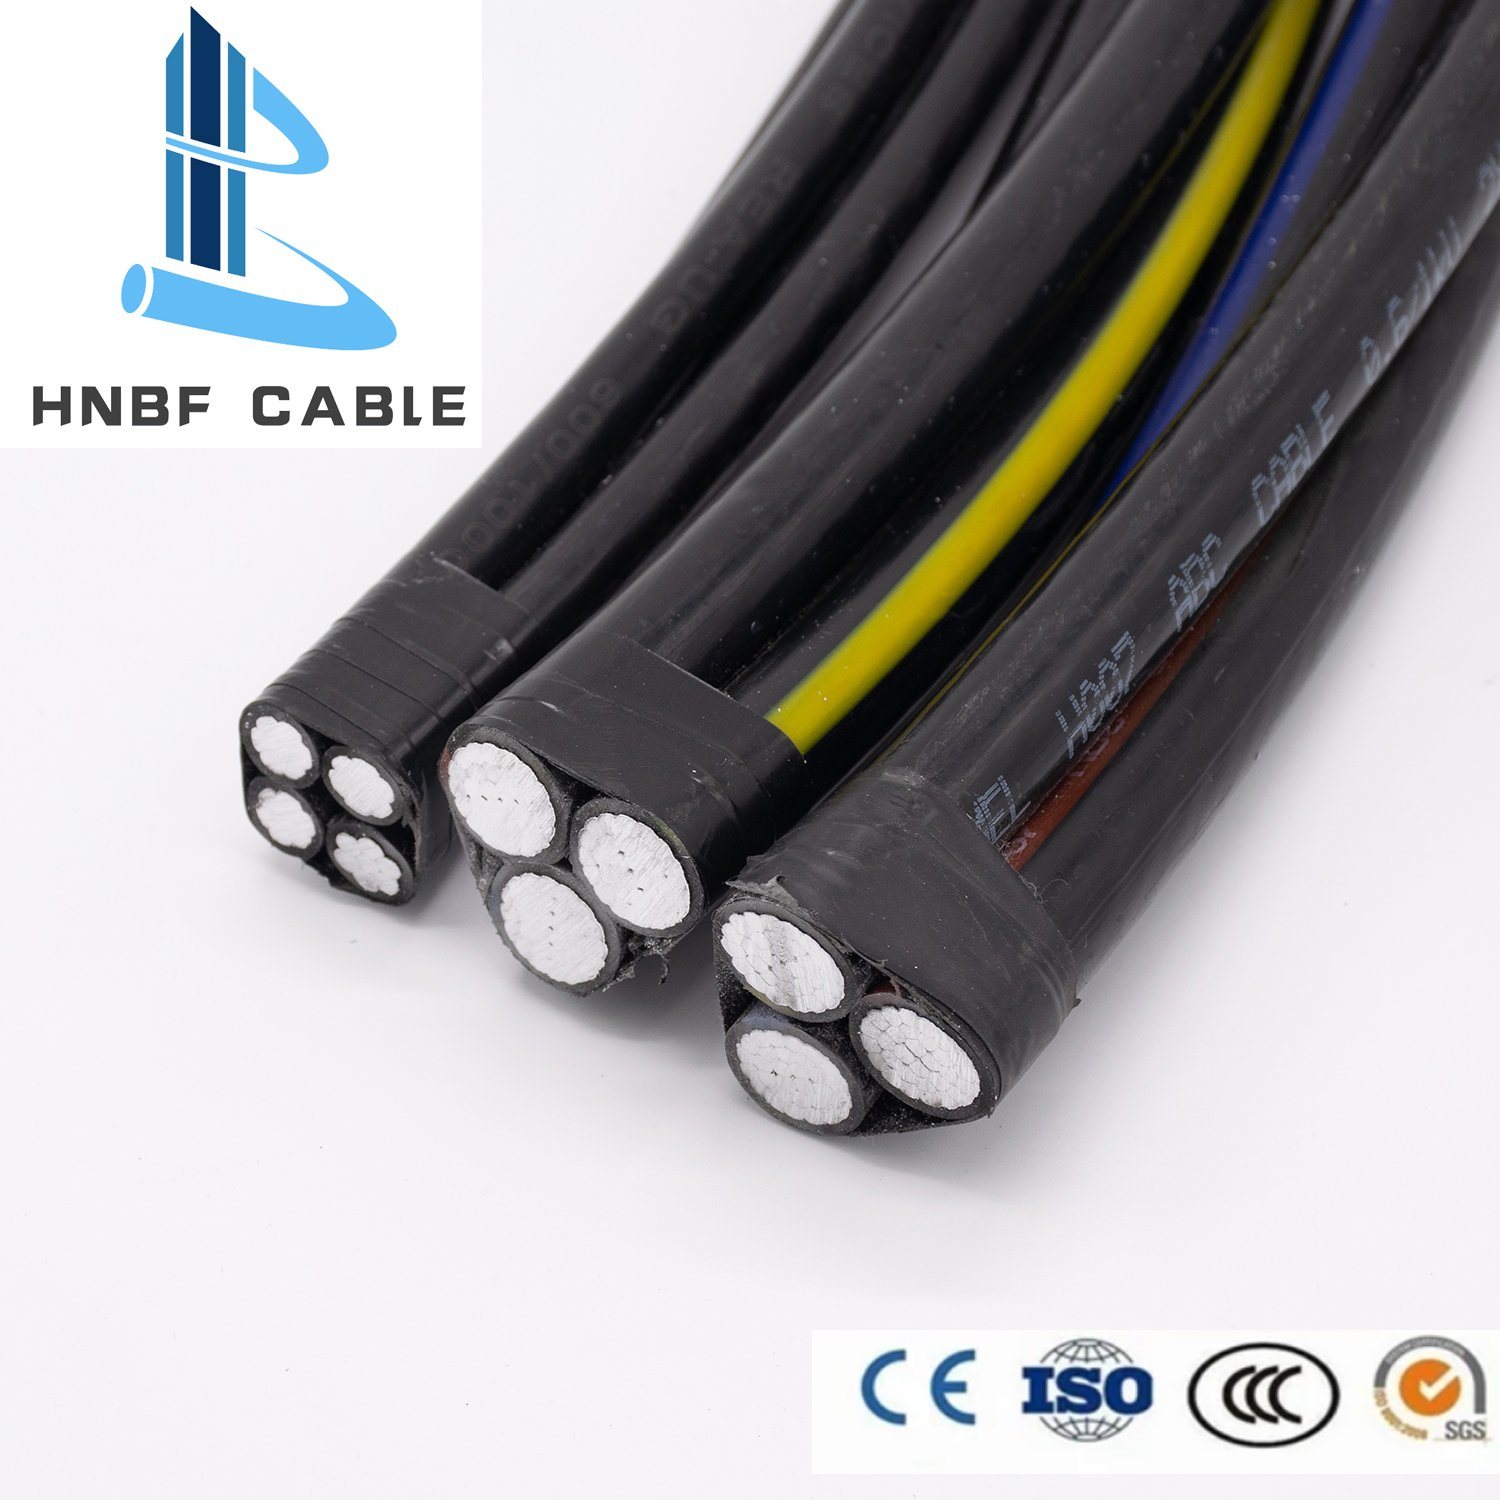 Overhead Triplex Service Drop Metalia Aerial Bundled Cable for Transmission Line ABC Cable Barnacles